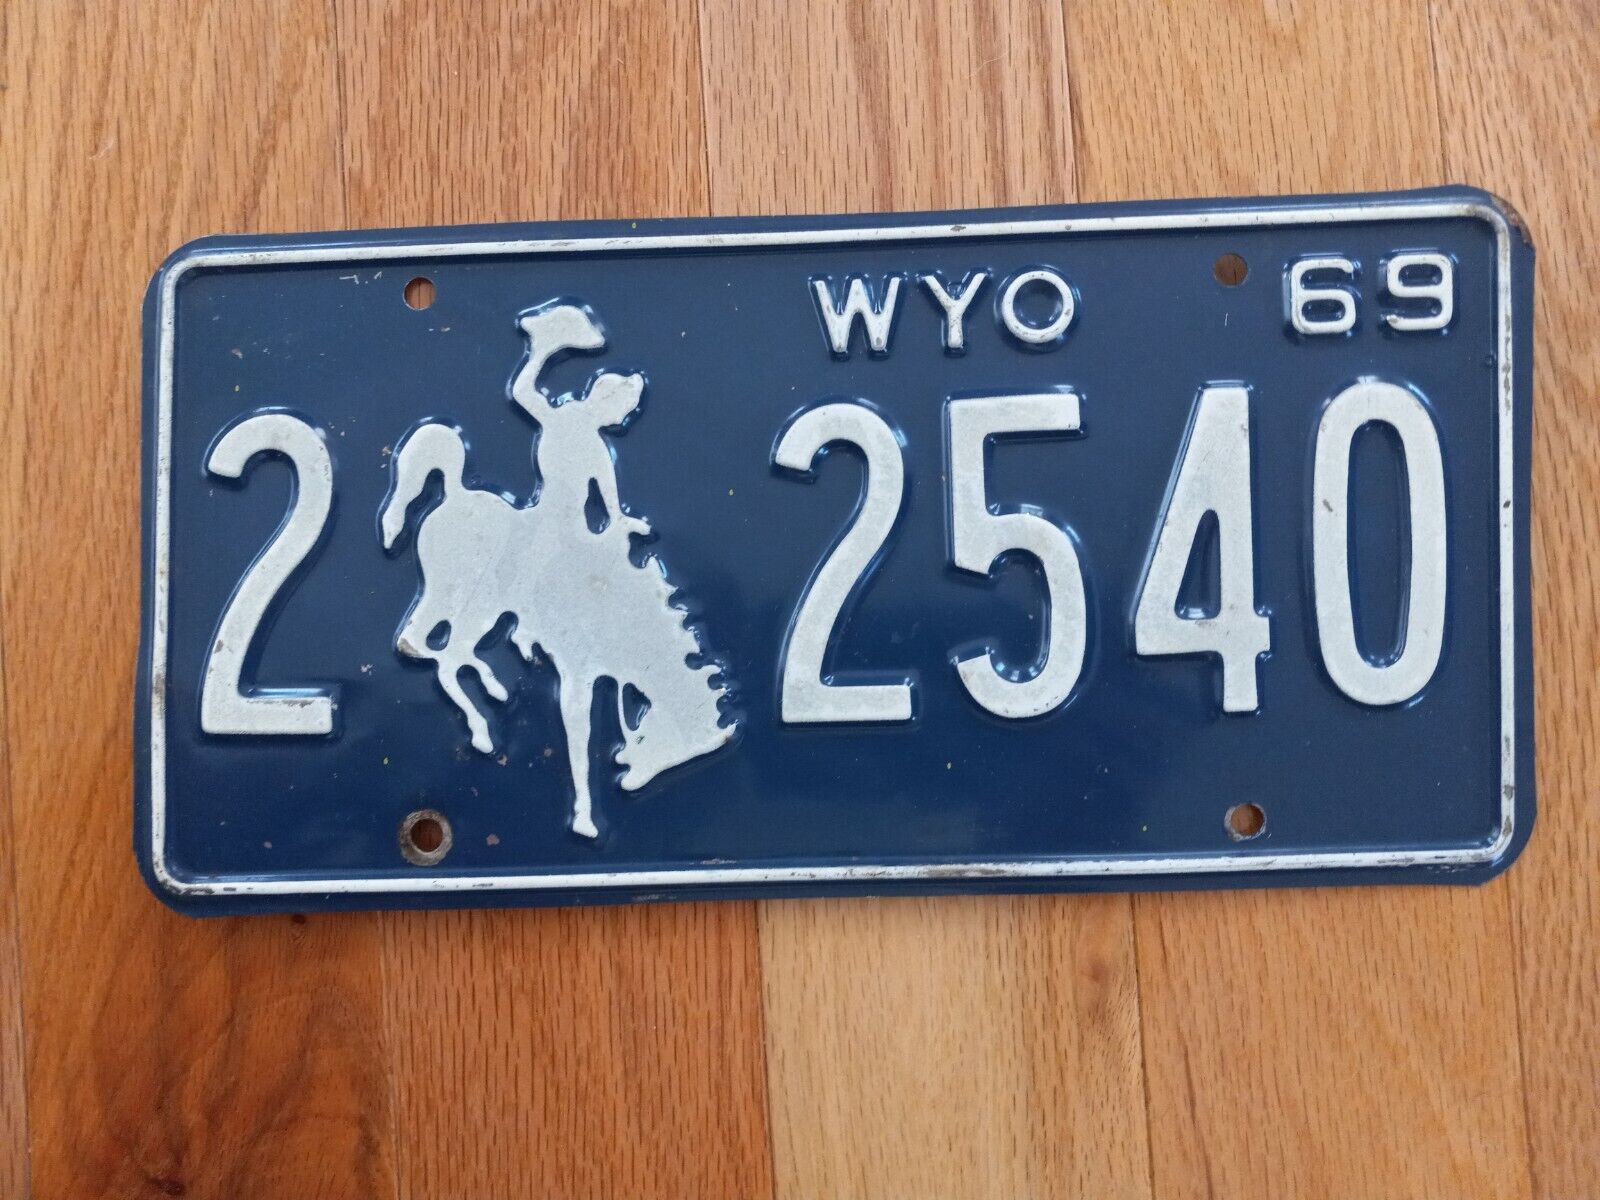 1969 Wyoming License Plate